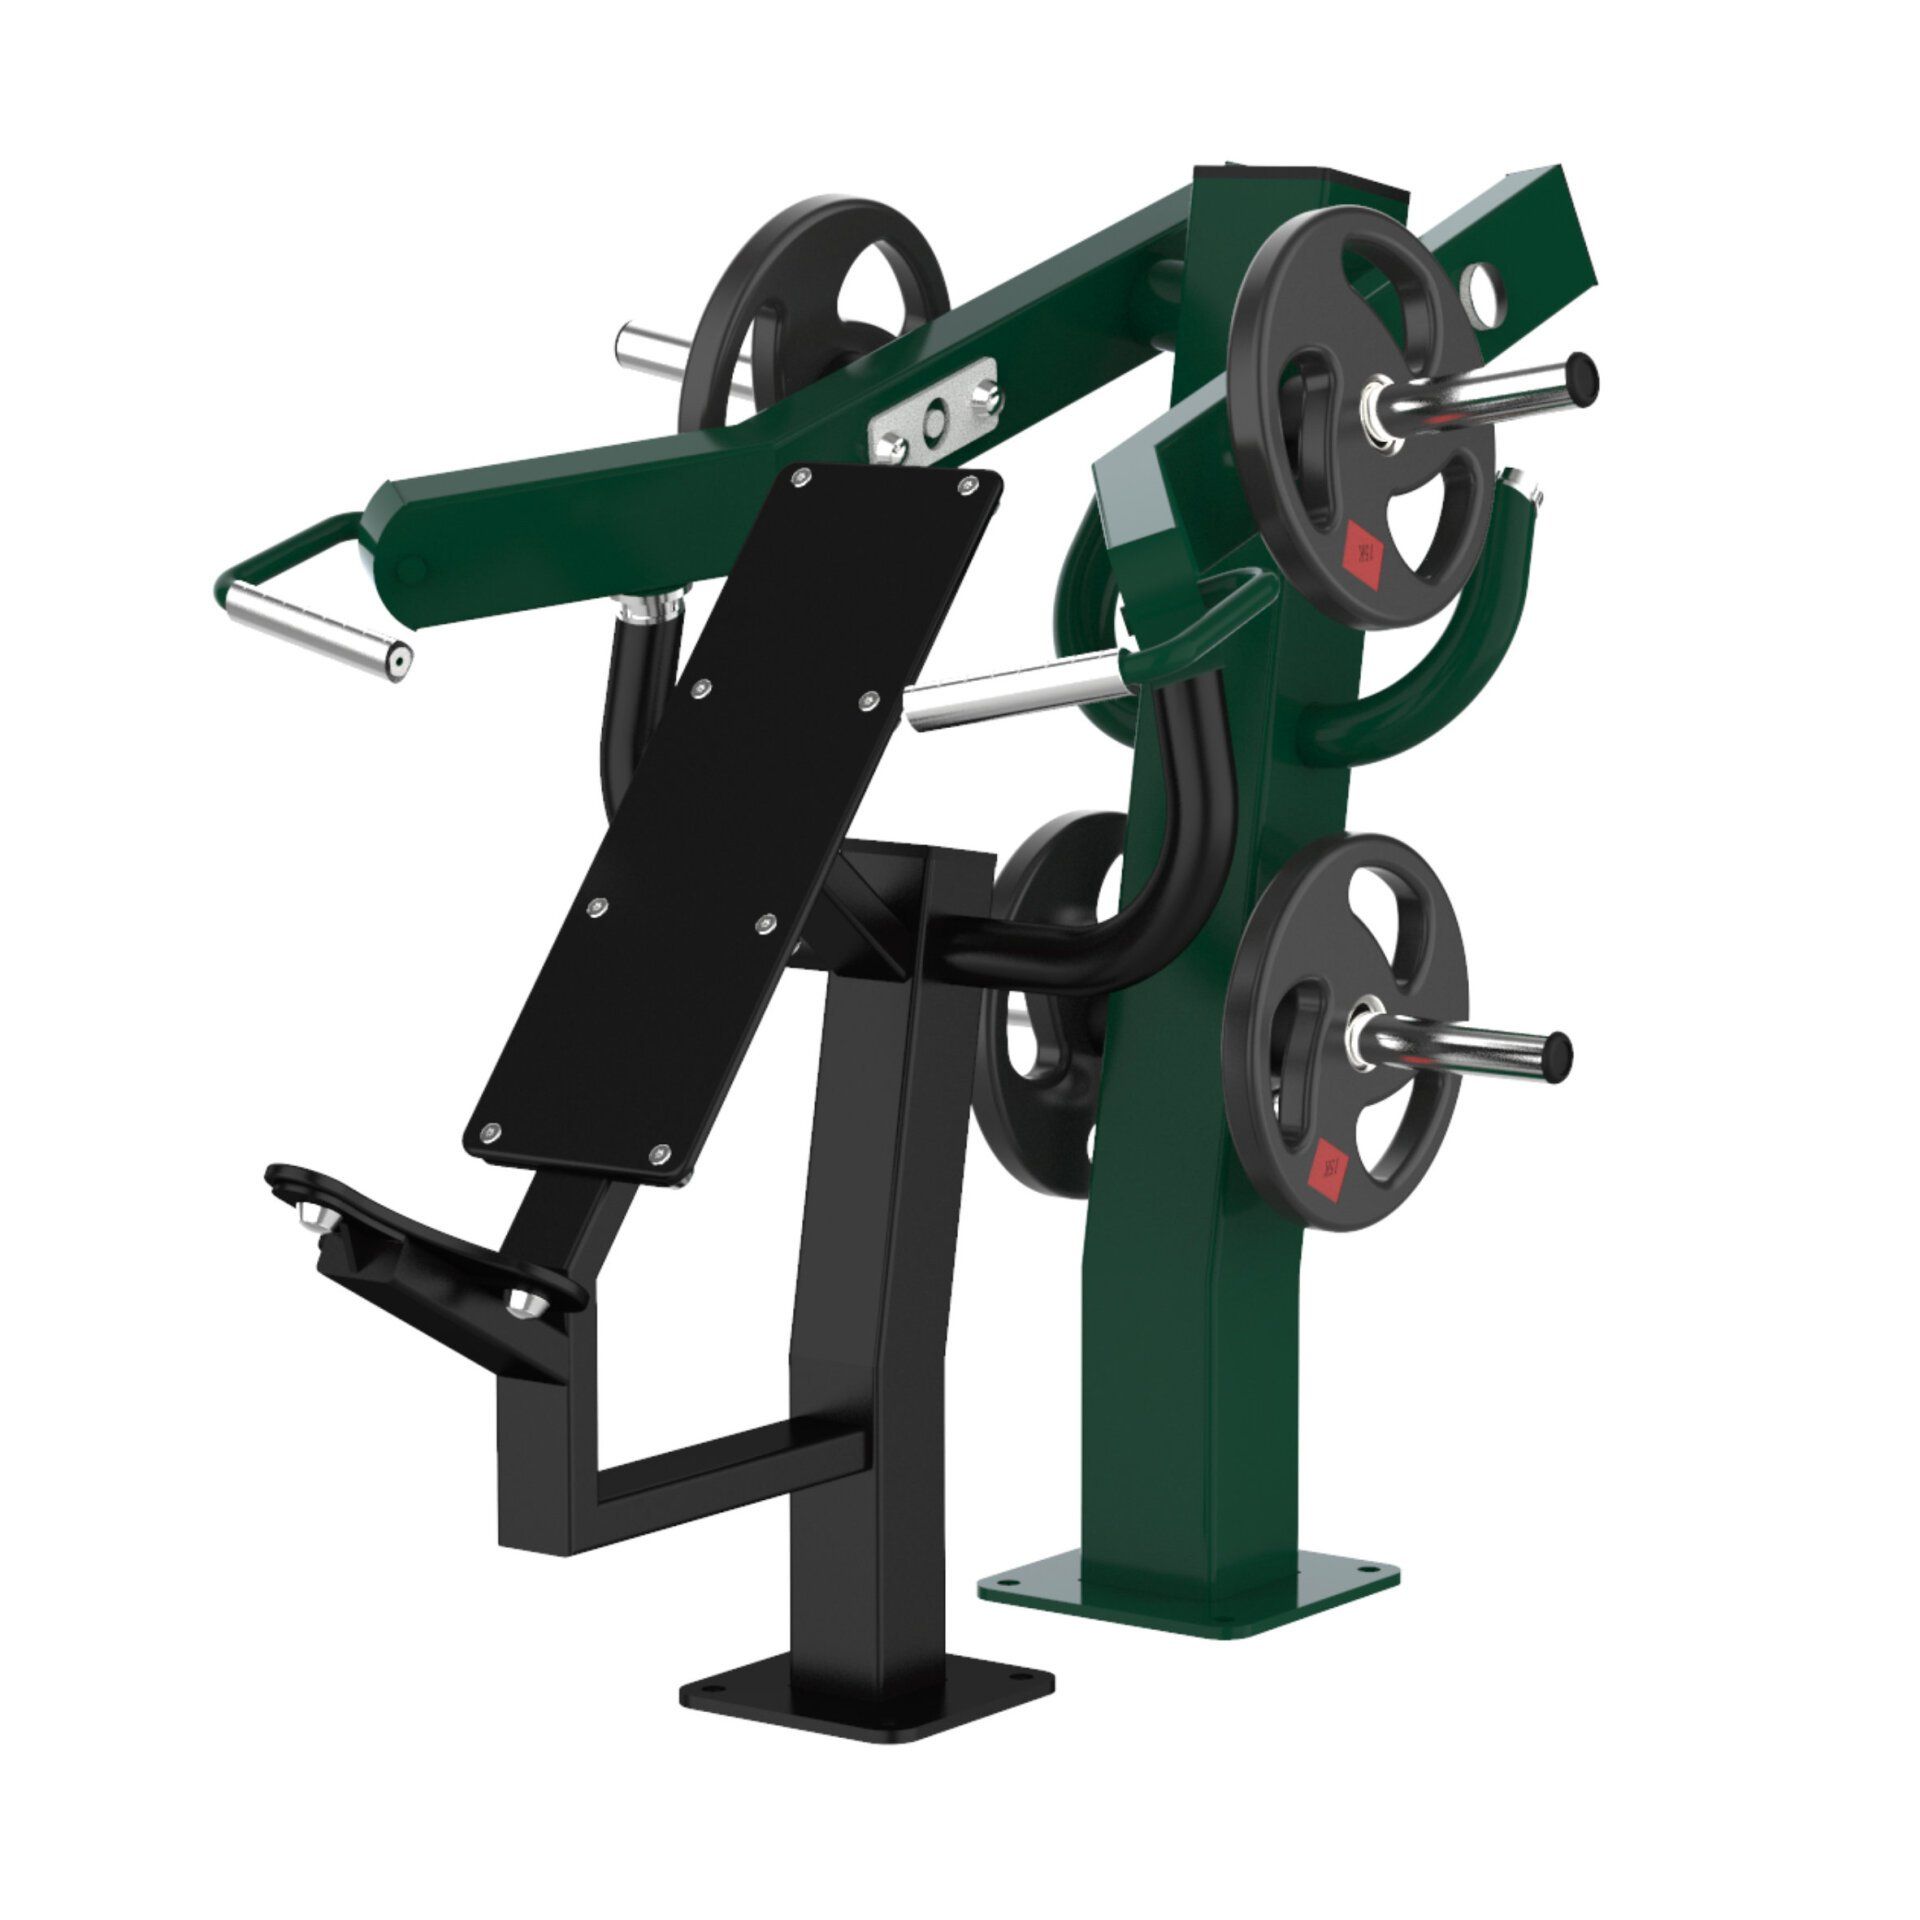 OPTEXI-003 OptiFit Excite Outdoor Plate Loaded Chest Press